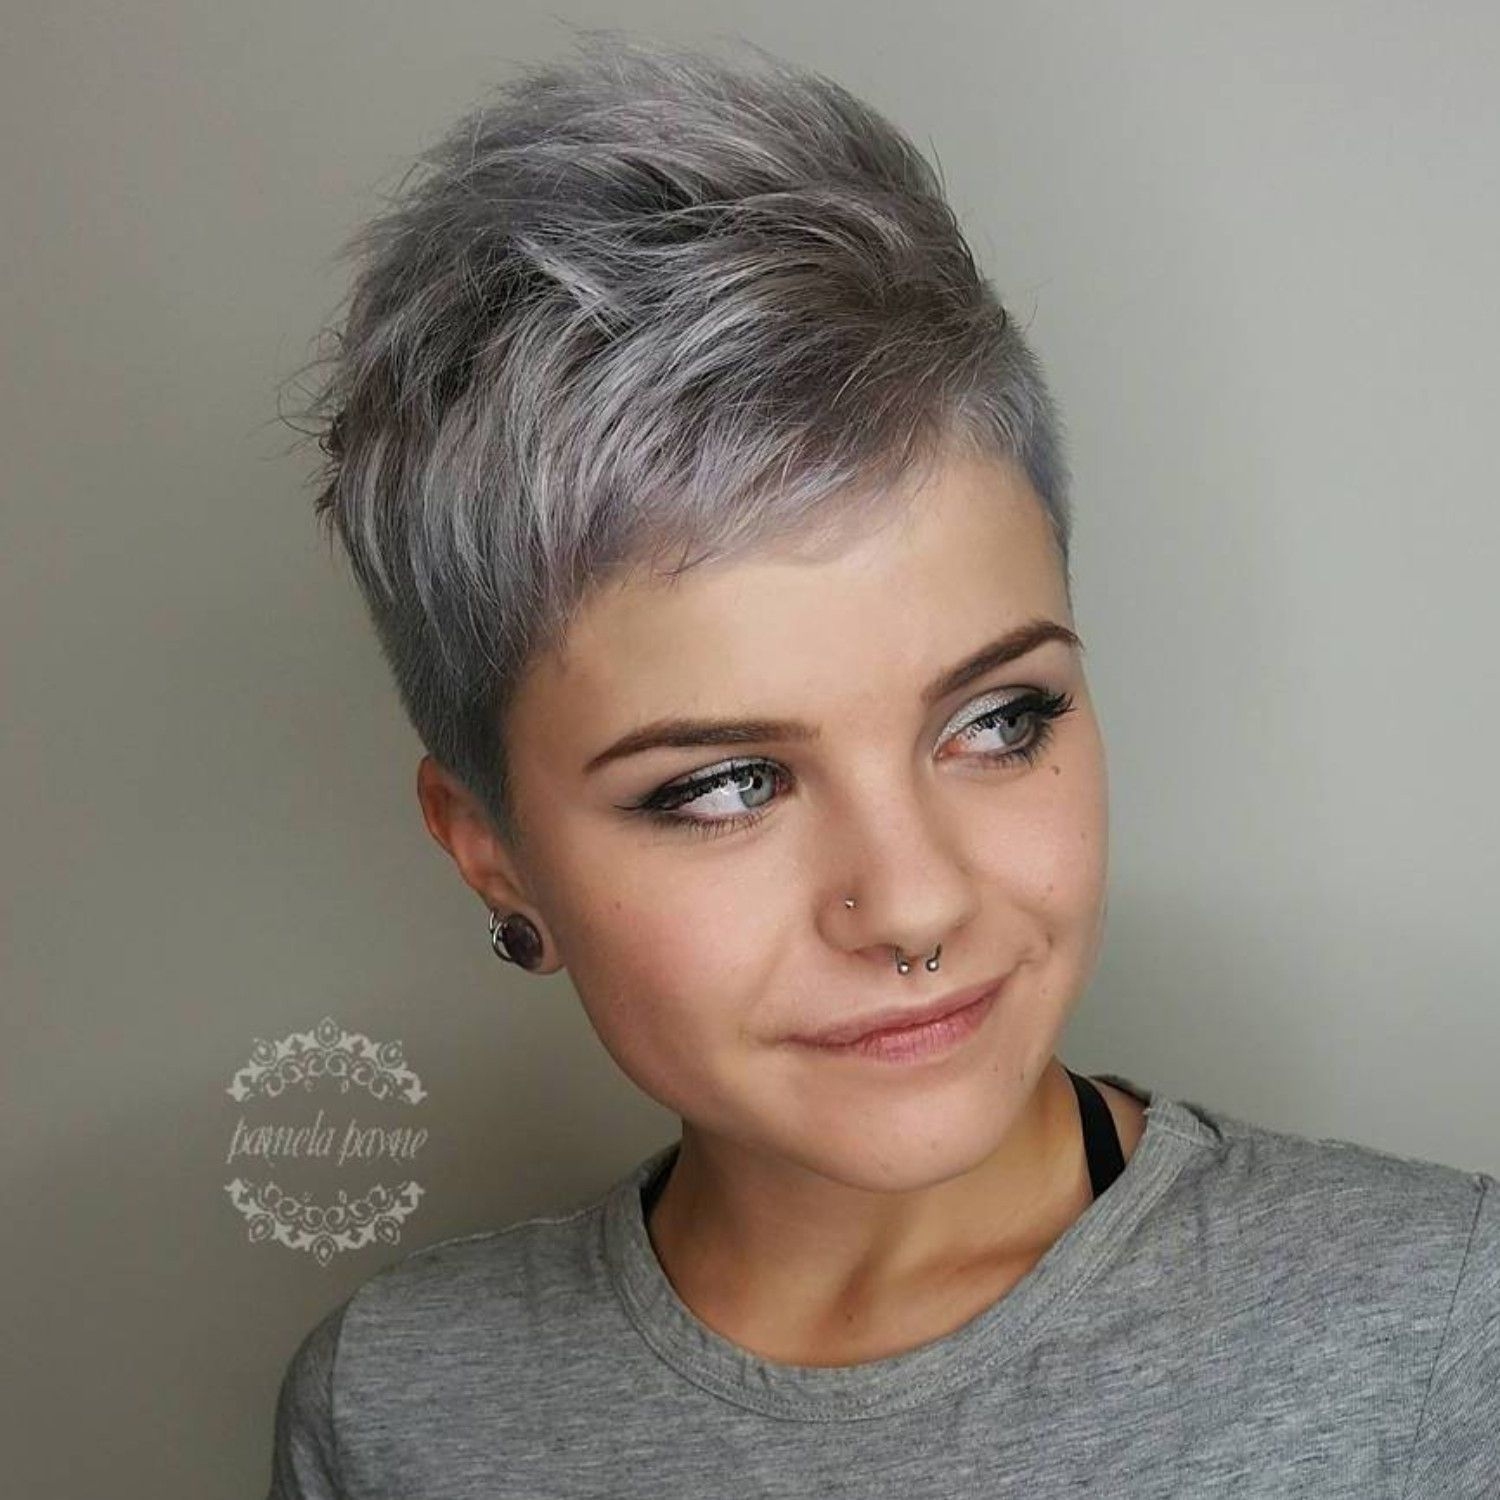 100 Mind-Blowing Short Hairstyles For Fine Hair In 2019 throughout Short Cuts For Fine Grey Hair